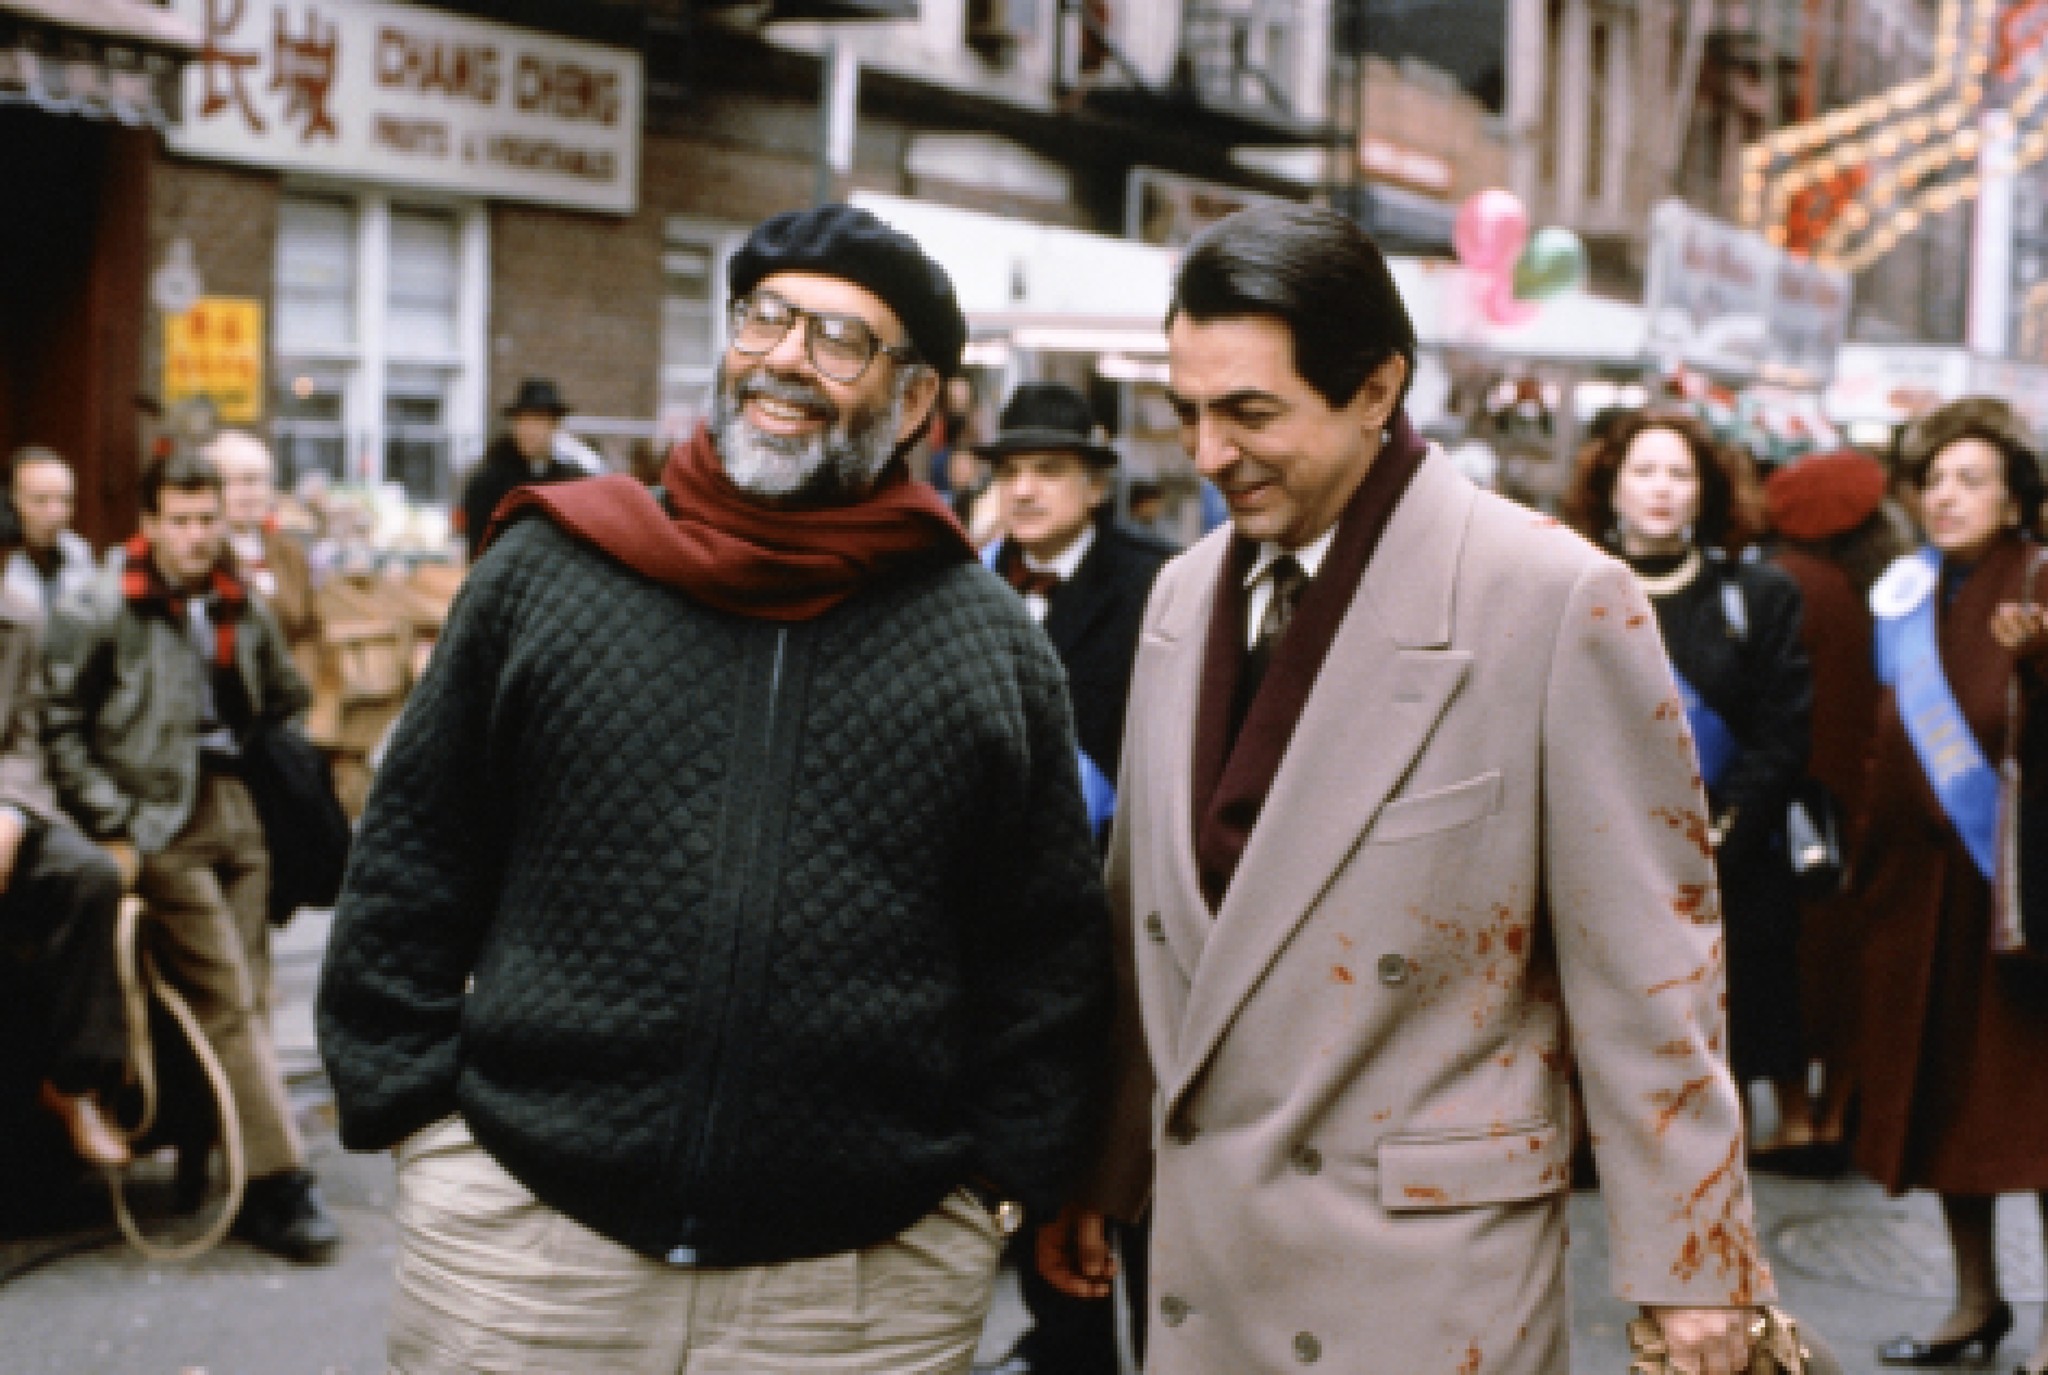 Francis Ford Coppola and Joe Mantegna in Krikstatevis III (1990)